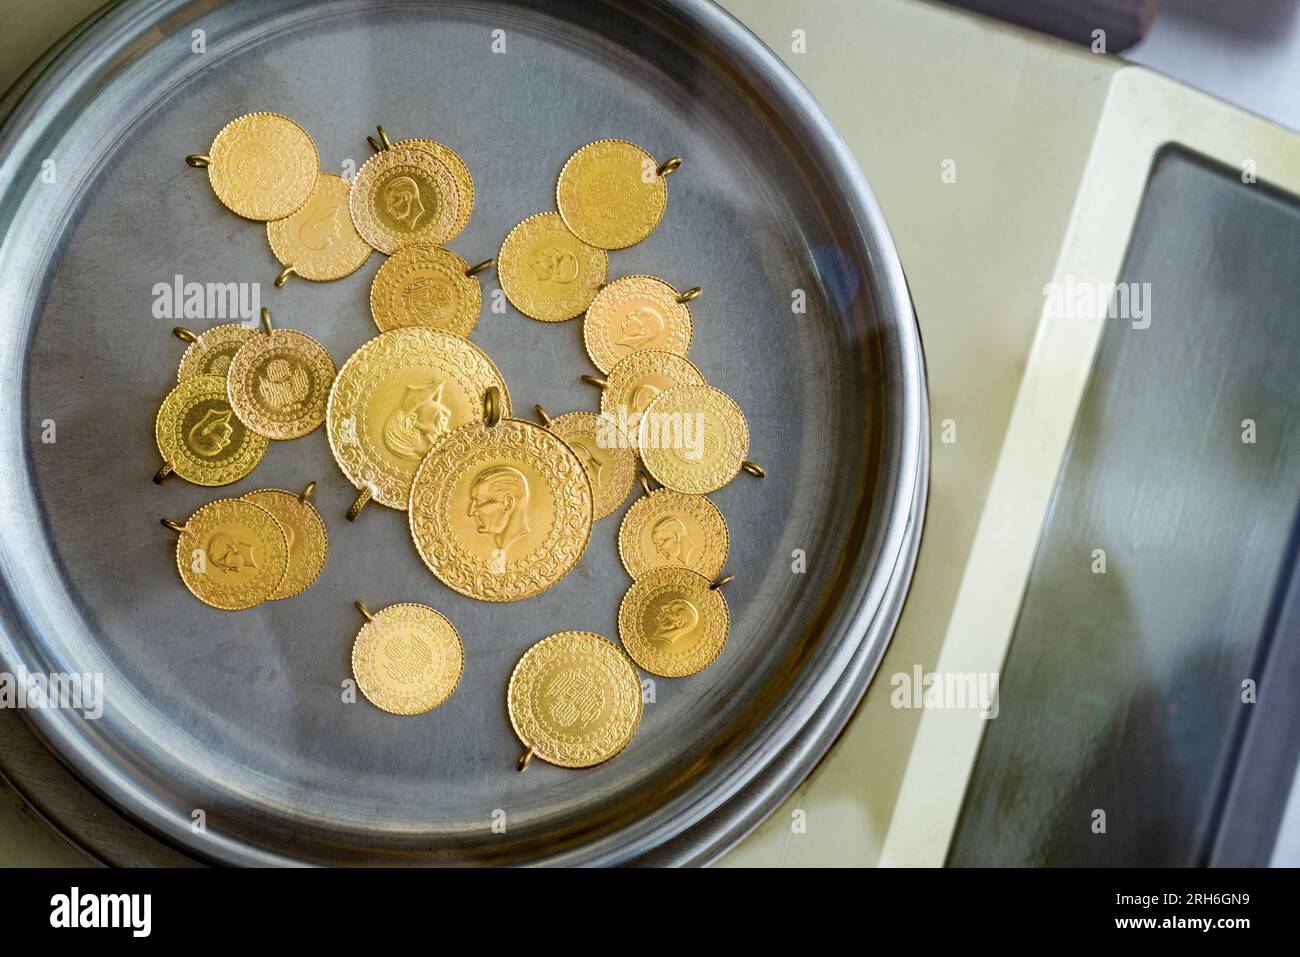 Stack of full, half and quarter Turkish gold coins on precision jeweler's scale Stock Photo